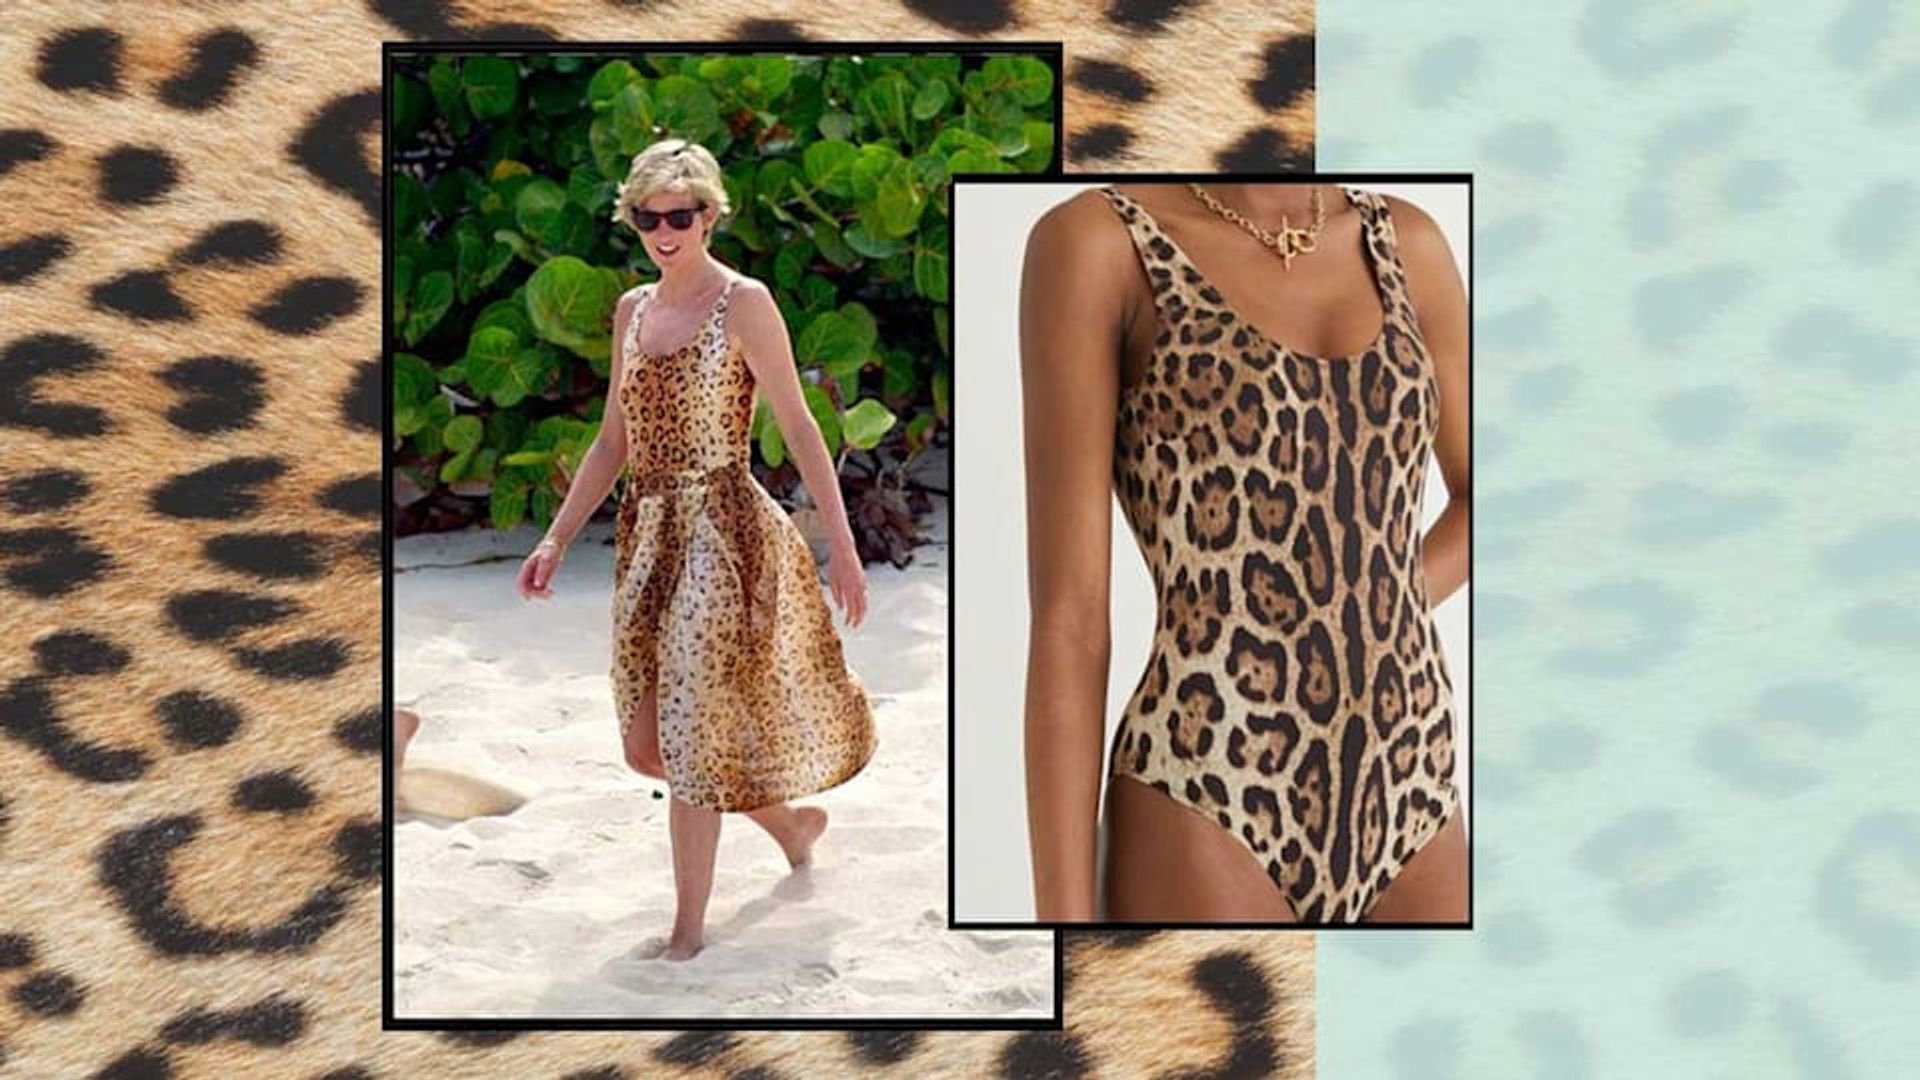 Leopard print swimsuits inspired by Princess Diana